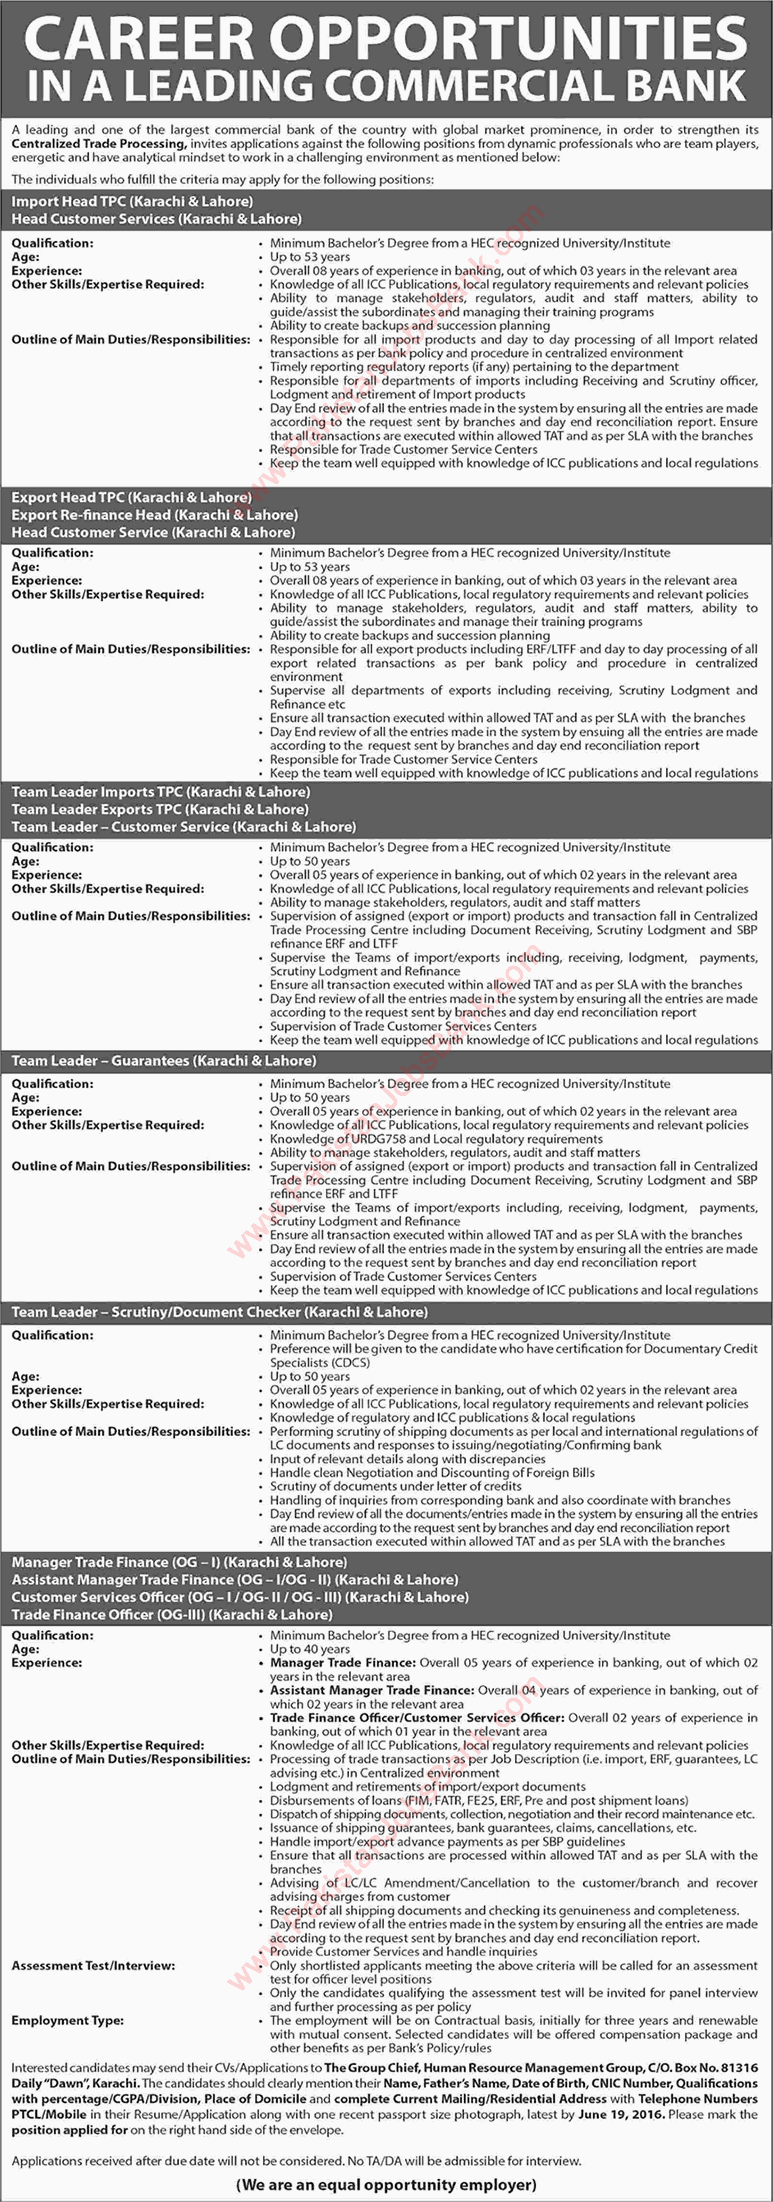 Bank Jobs in Karachi / Lahore June 2016 Team Leaders, Customer Service Officers & Others Latest